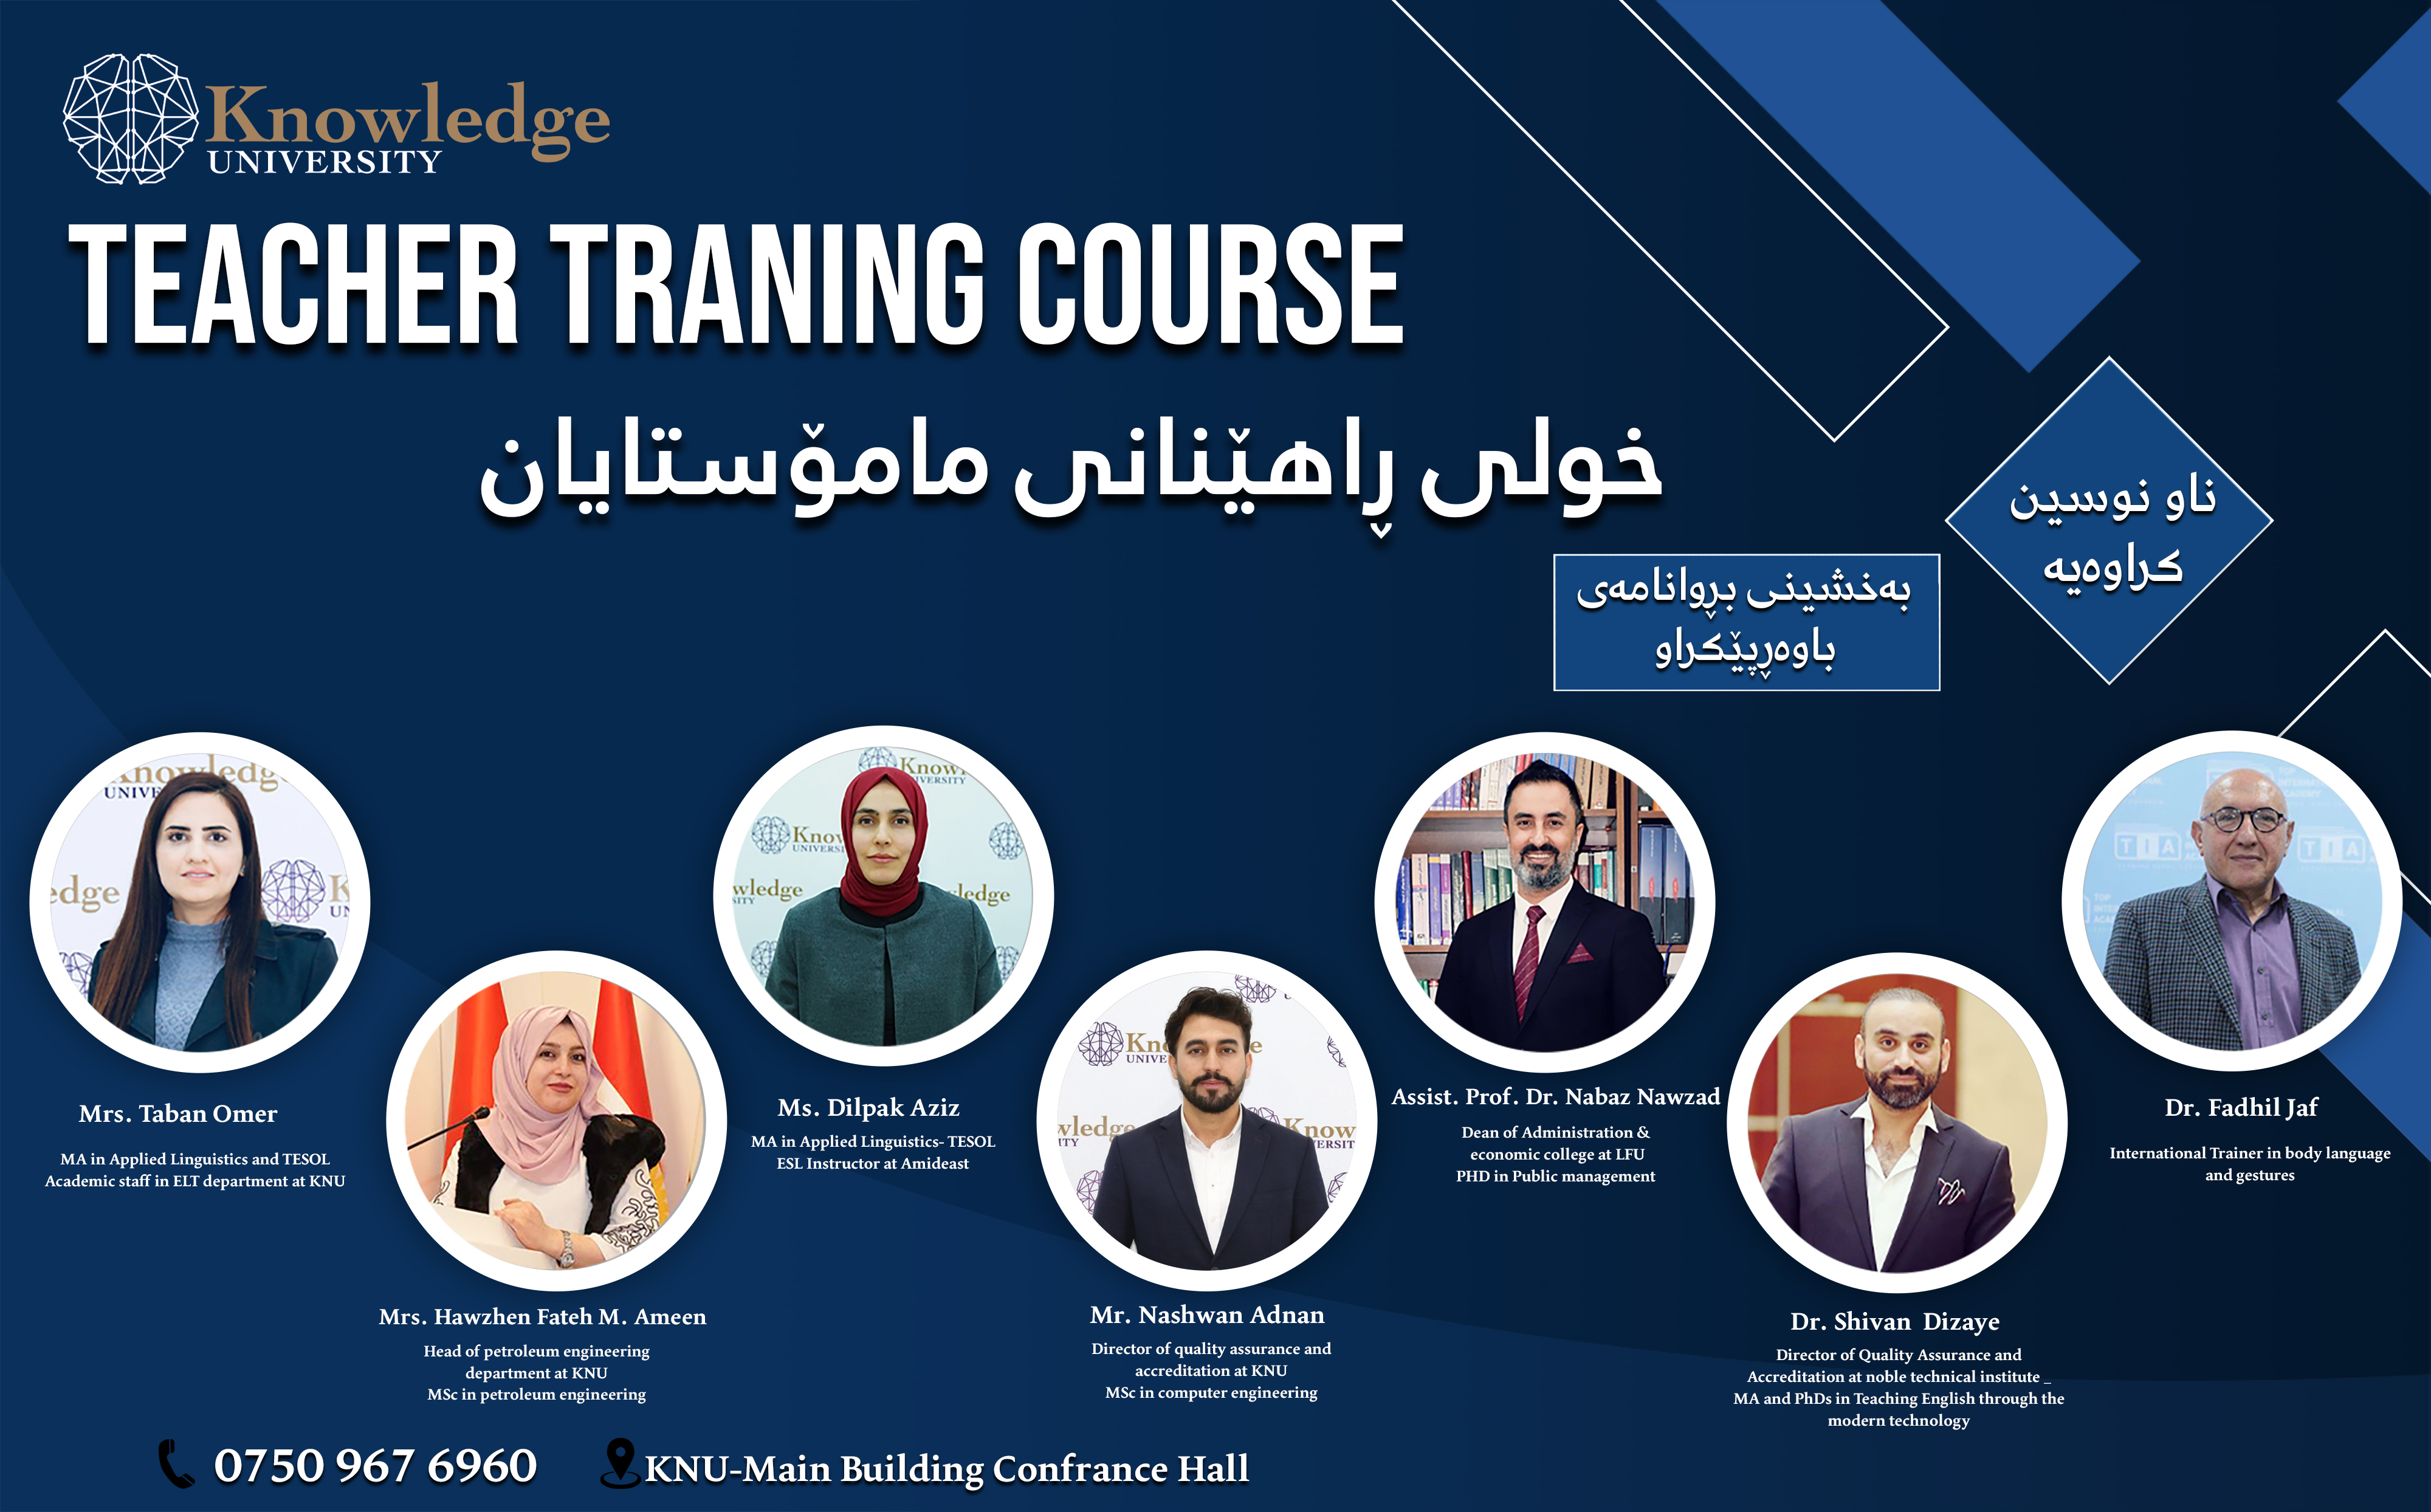 Teacher Traning Course at Knowledge University: Topics and Presenters